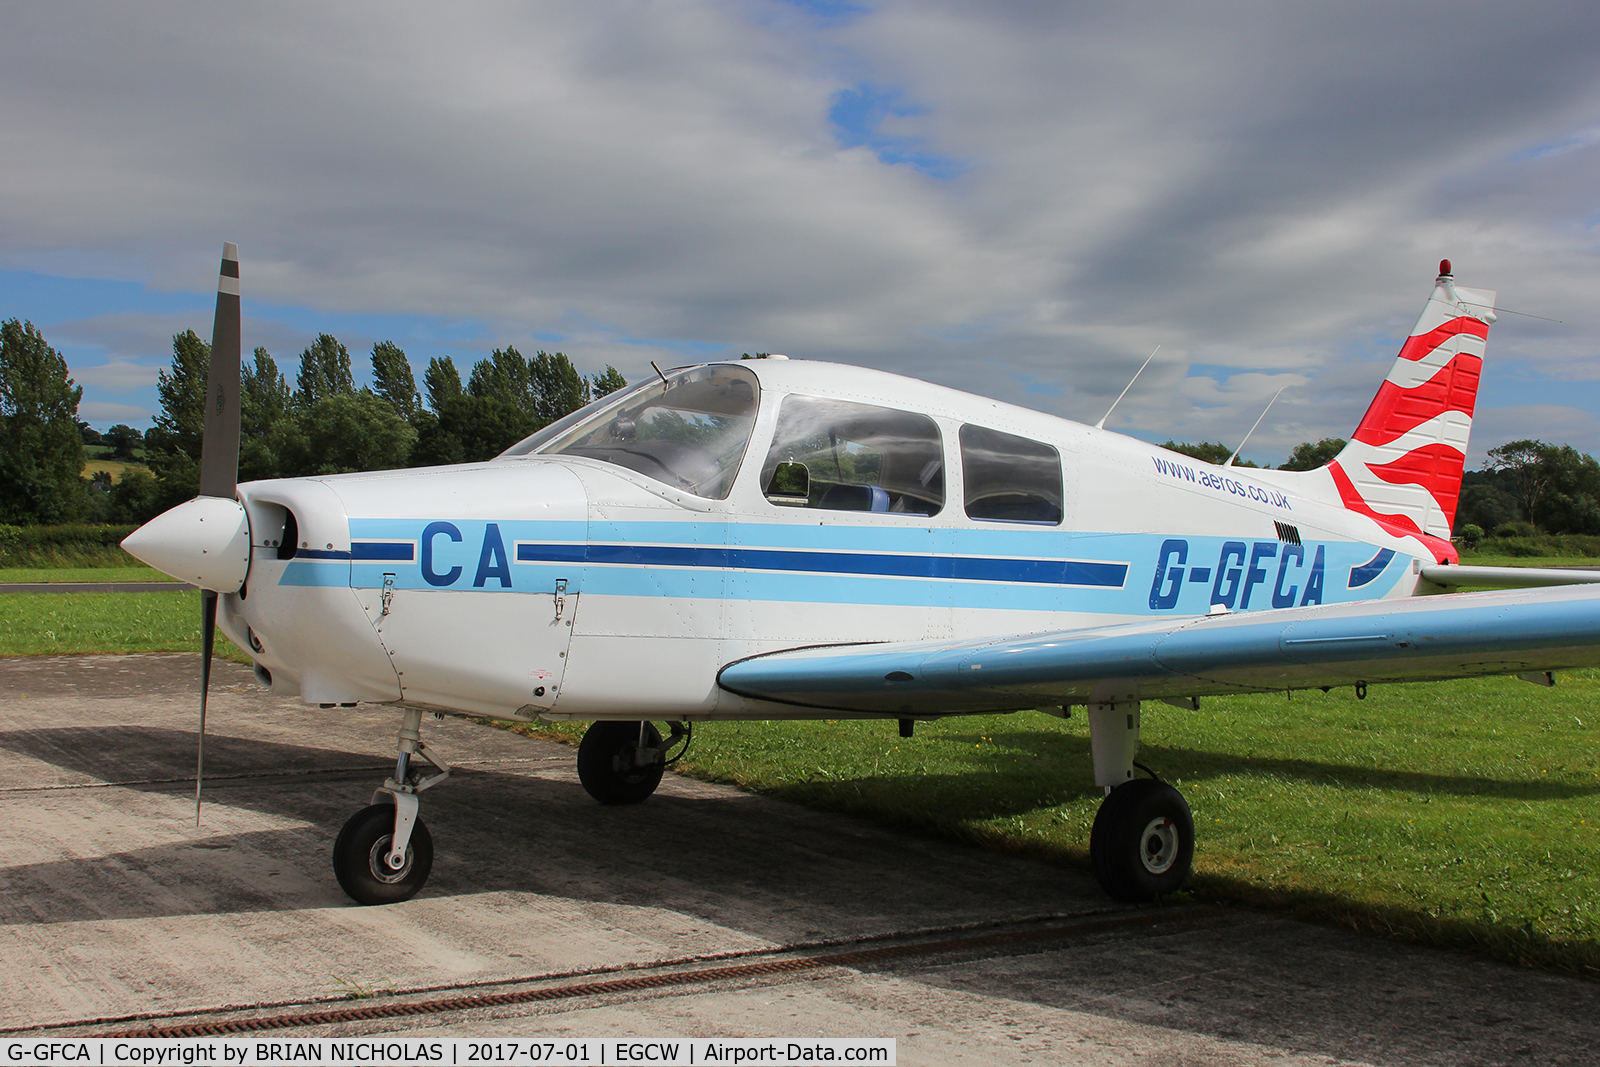 G-GFCA, 1989 Piper PA-28-161 Cadet C/N 28-41100, At Welshpool for the day.